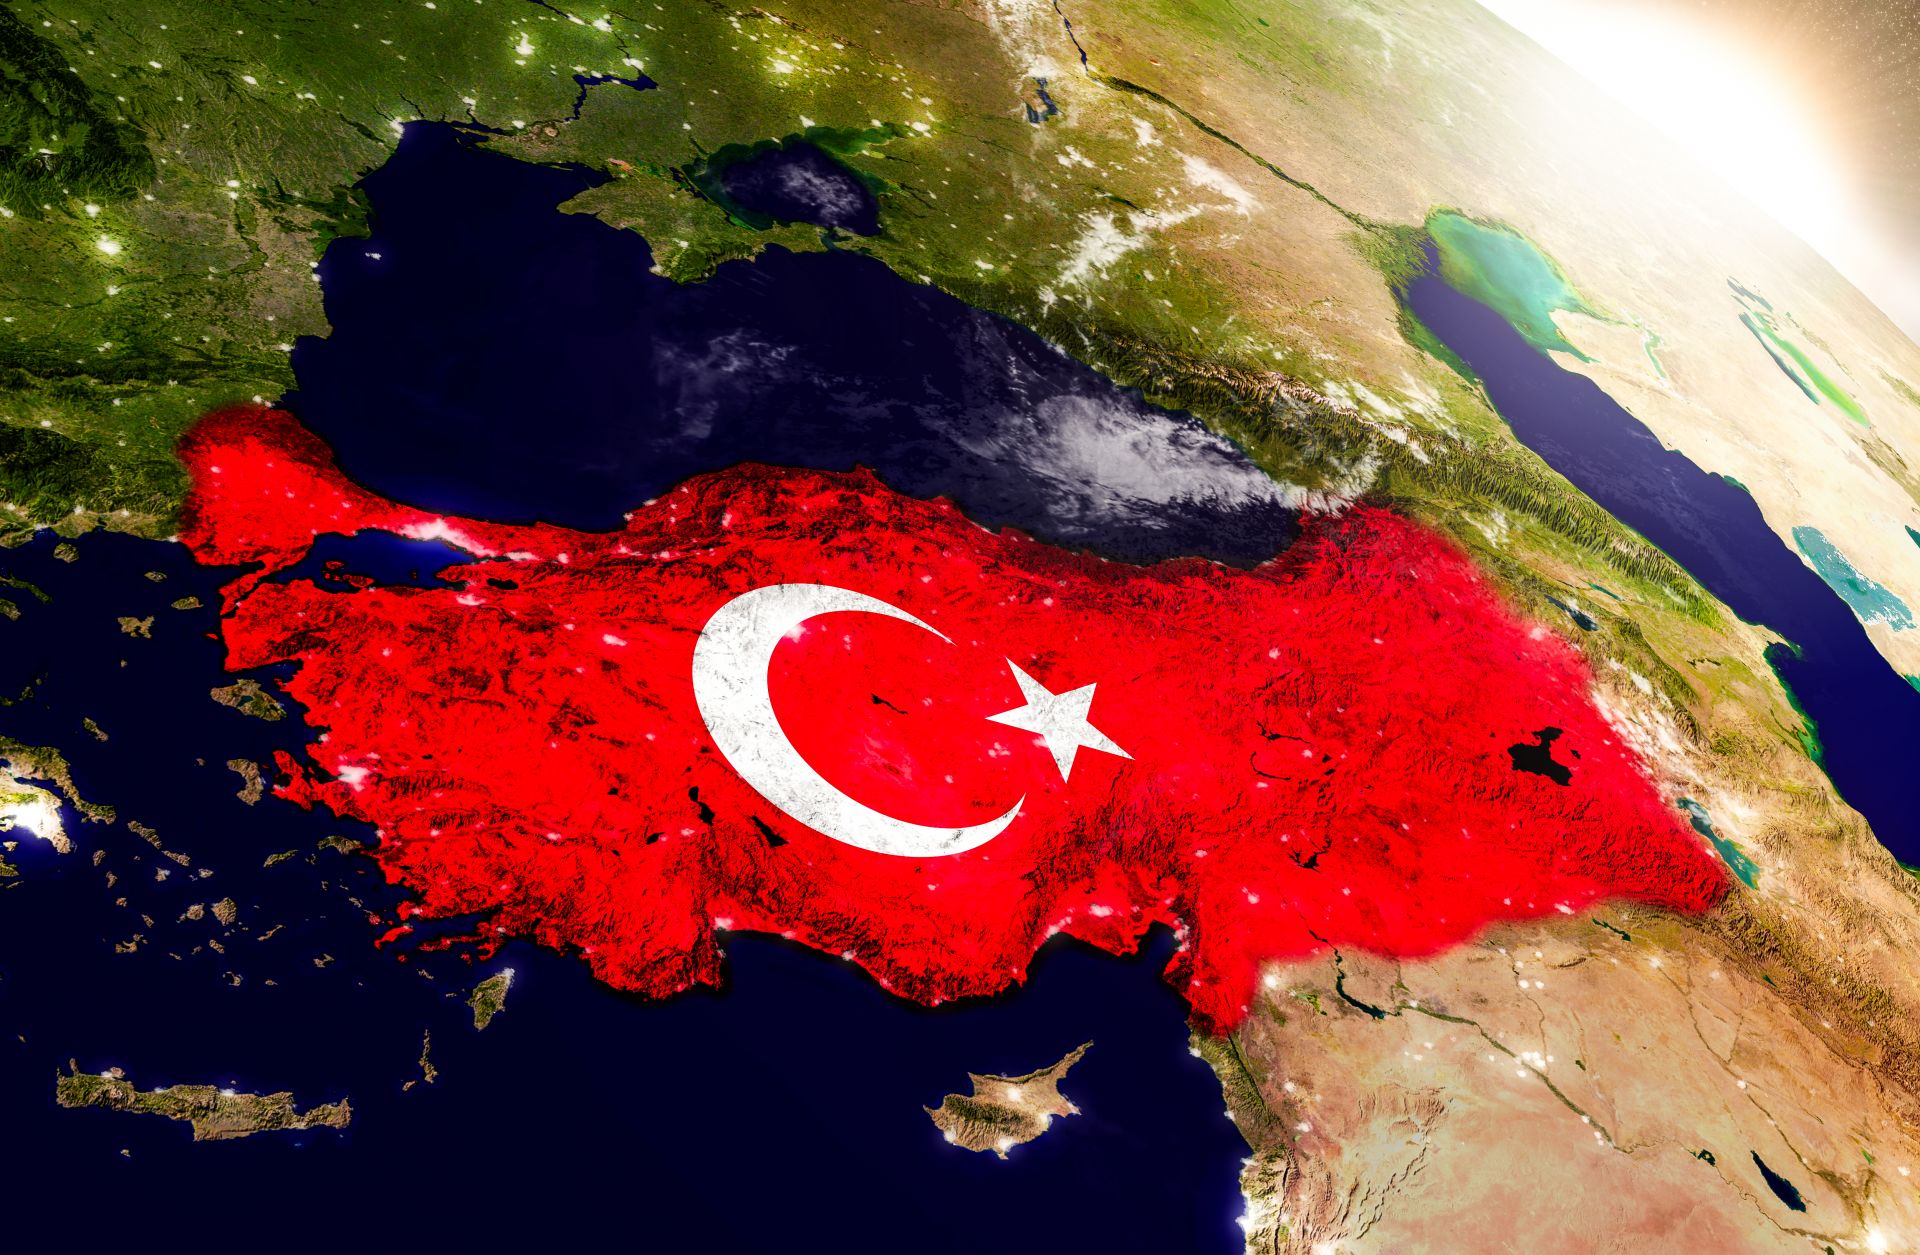 A 3D map of Turkey with a flag embedded into the planet's surface during sunrise.